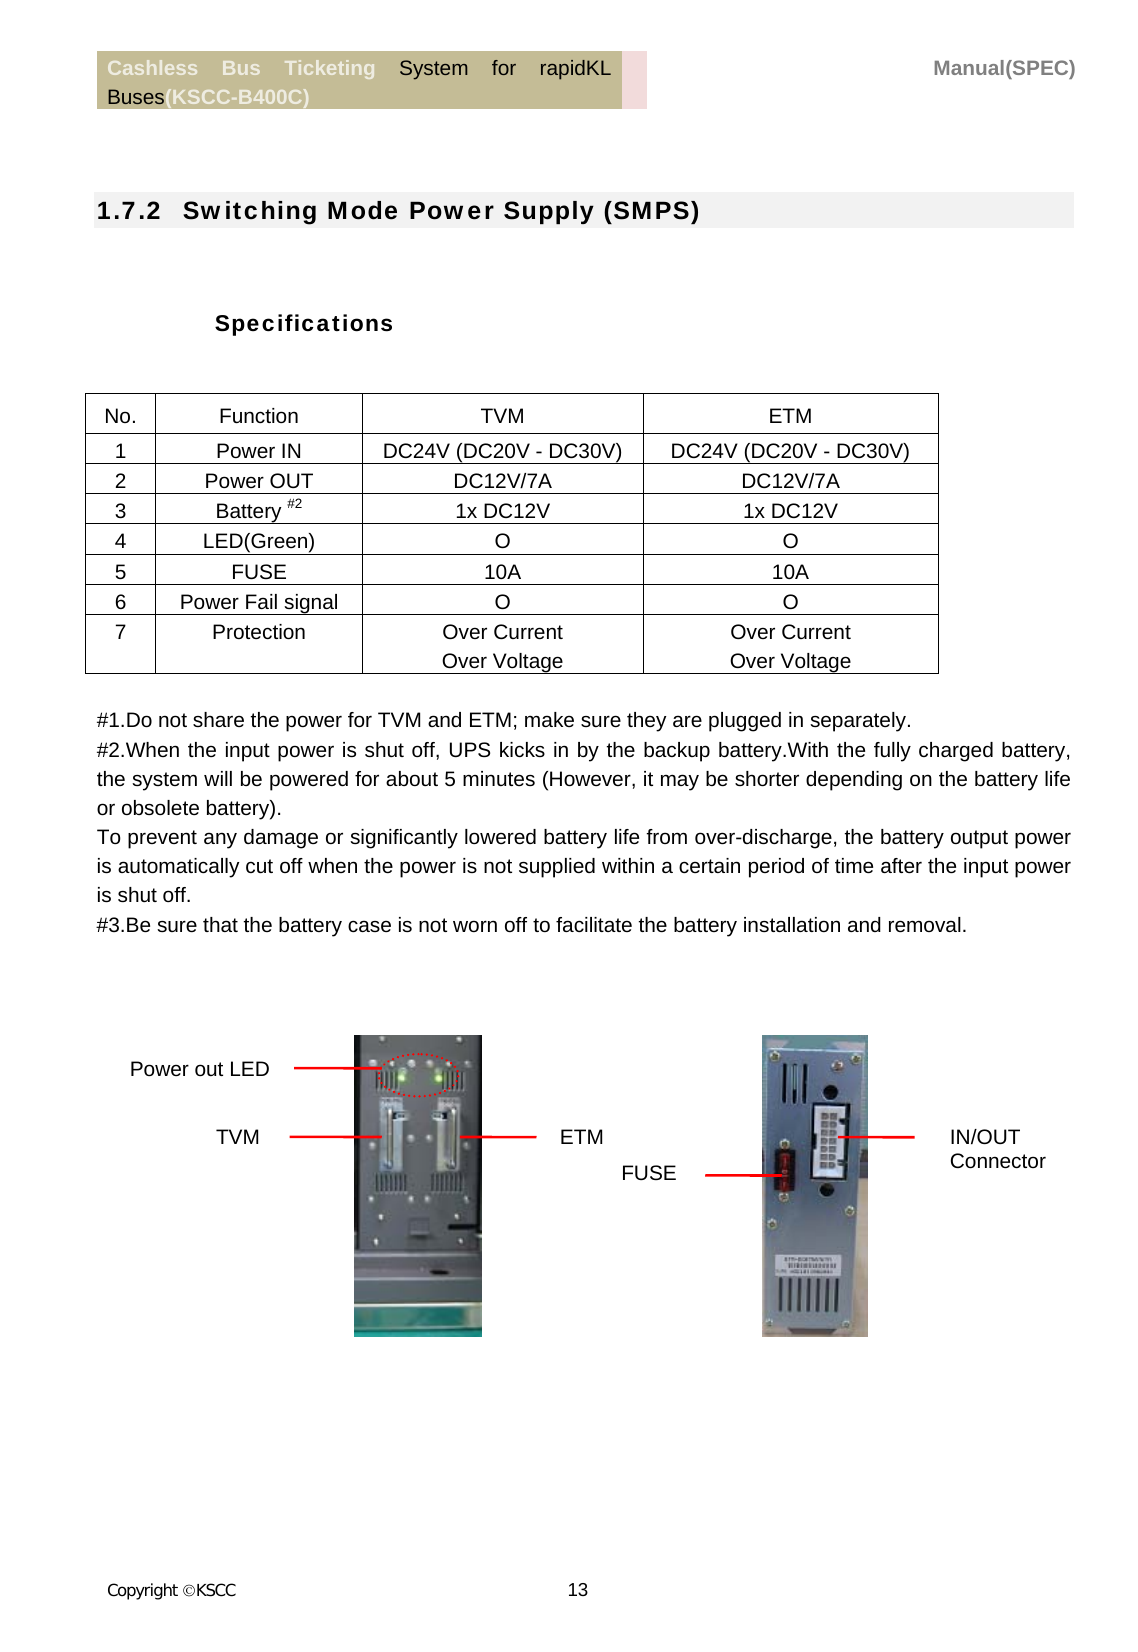 Cashless Bus Ticketing System for rapidKL Buses(KSCC-B400C)  Manual(SPEC) Copyright KSCC 13     1.7.2   Switching Mode Power Supply (SMPS)  Specifications  No. Function  TVM  ETM 1  Power IN  DC24V (DC20V - DC30V)  DC24V (DC20V - DC30V) 2 Power OUT  DC12V/7A  DC12V/7A 3 Battery #2  1x DC12V  1x DC12V 4 LED(Green)  O  O 5 FUSE  10A  10A 6  Power Fail signal  O  O 7 Protection  Over Current Over Voltage Over Current Over Voltage  #1.Do not share the power for TVM and ETM; make sure they are plugged in separately. #2.When the input power is shut off, UPS kicks in by the backup battery.With the fully charged battery, the system will be powered for about 5 minutes (However, it may be shorter depending on the battery life or obsolete battery). To prevent any damage or significantly lowered battery life from over-discharge, the battery output power is automatically cut off when the power is not supplied within a certain period of time after the input power is shut off. #3.Be sure that the battery case is not worn off to facilitate the battery installation and removal.                TVM  ETMPower out LED FUSEIN/OUT Connector 